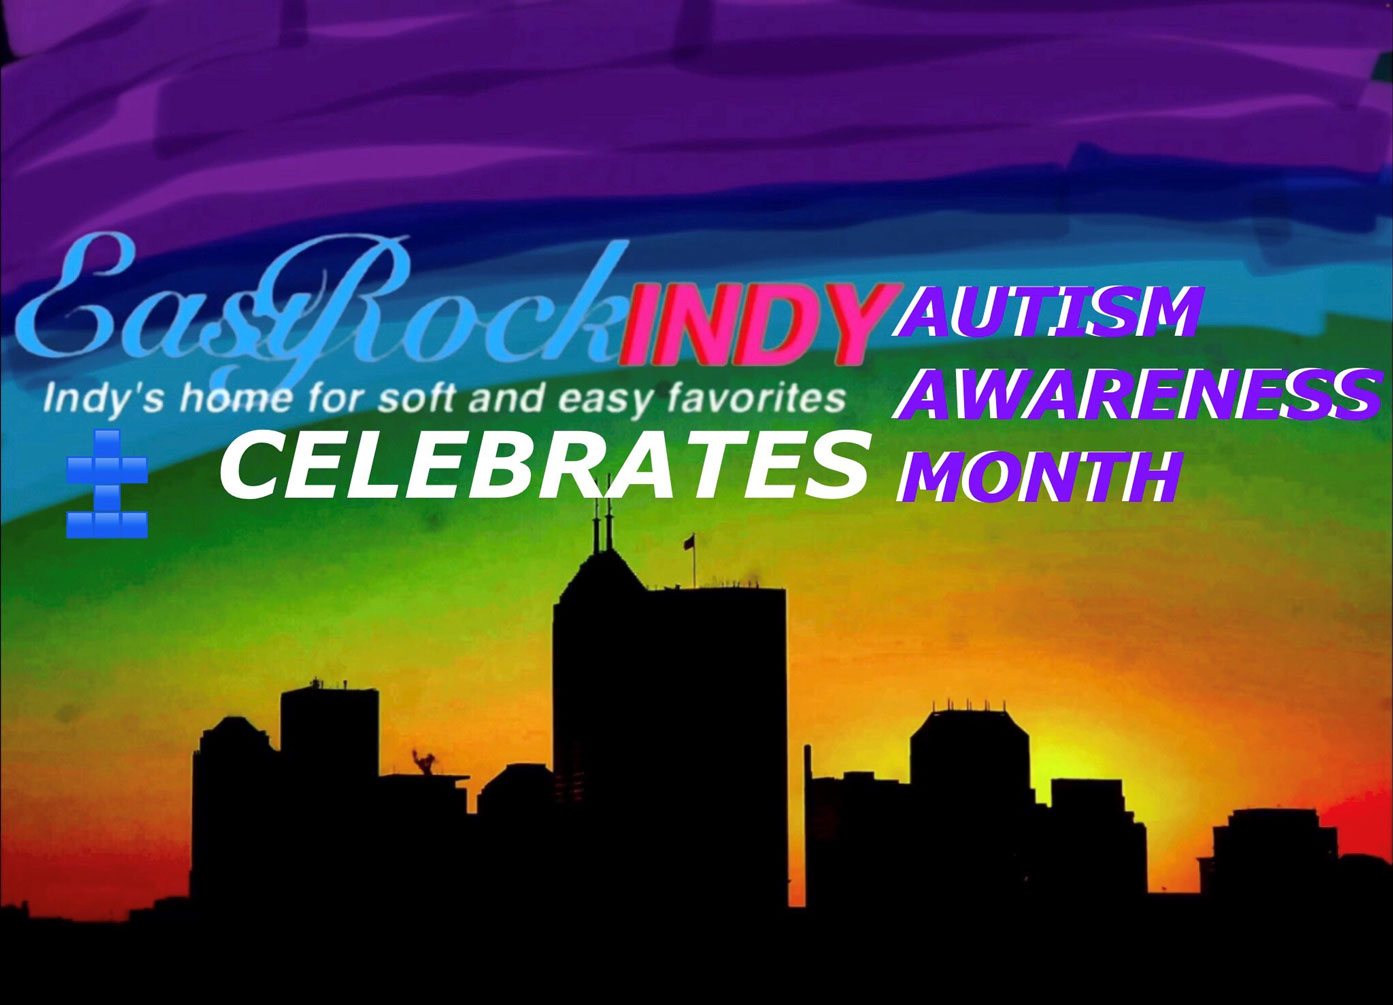 A picture of downtown Indianapolis in a rainbow overlay, with the Easy Rock Indy logo in the foreground.